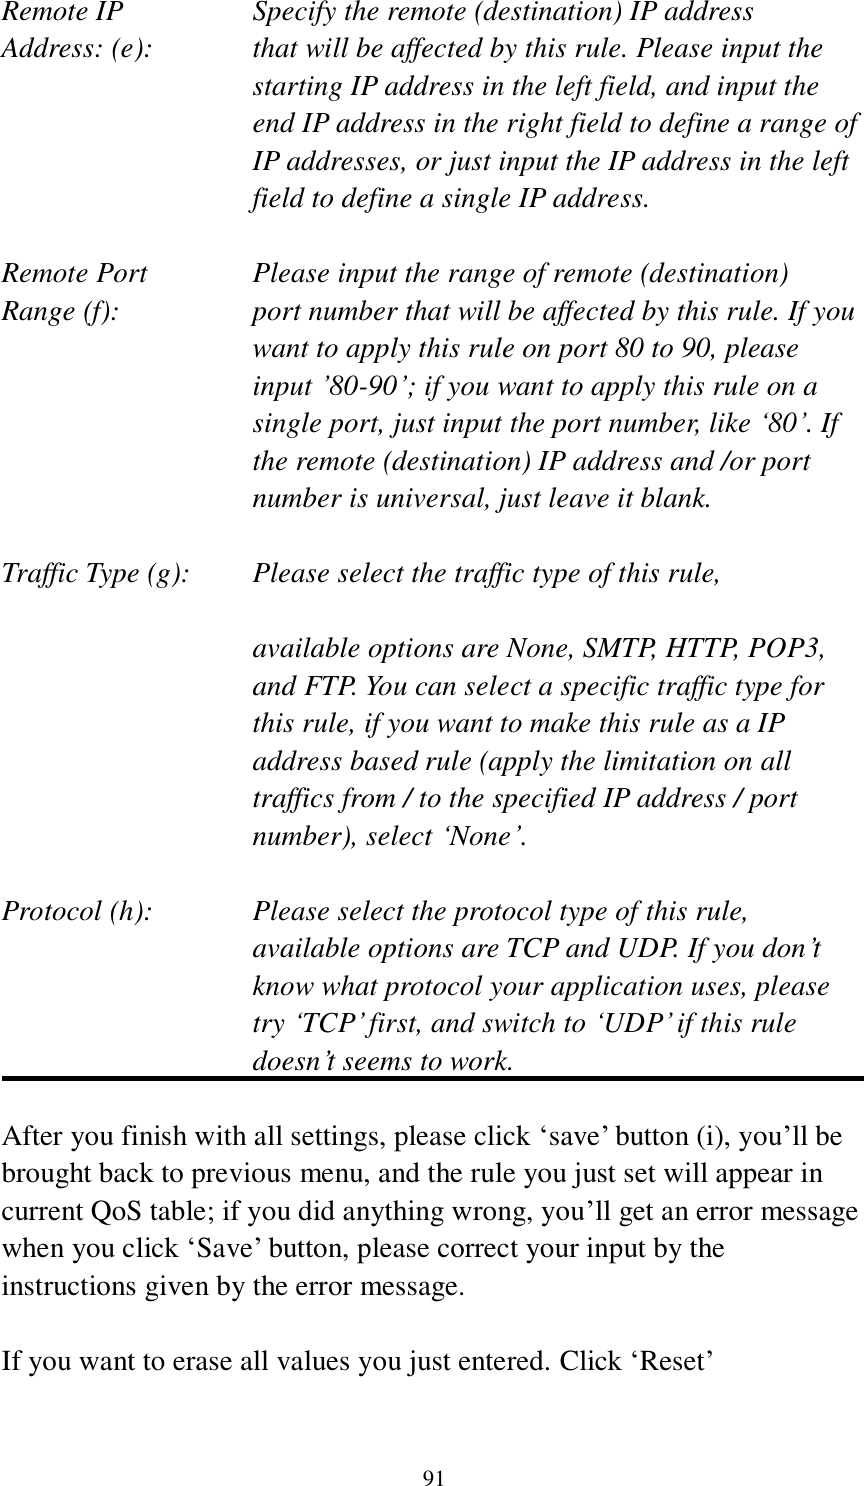 91 Remote IP        Specify the remote (destination) IP address Address: (e):    that will be affected by this rule. Please input the starting IP address in the left field, and input the end IP address in the right field to define a range of IP addresses, or just input the IP address in the left field to define a single IP address.  Remote Port      Please input the range of remote (destination) Range (f):  port number that will be affected by this rule. If you want to apply this rule on port 80 to 90, please input ‟80-90‟; if you want to apply this rule on a single port, just input the port number, like „80‟. If the remote (destination) IP address and /or port number is universal, just leave it blank.  Traffic Type (g):    Please select the traffic type of this rule,  available options are None, SMTP, HTTP, POP3, and FTP. You can select a specific traffic type for this rule, if you want to make this rule as a IP address based rule (apply the limitation on all traffics from / to the specified IP address / port number), select „None‟.  Protocol (h):      Please select the protocol type of this rule,   available options are TCP and UDP. If you don‟t know what protocol your application uses, please try „TCP‟ first, and switch to „UDP‟ if this rule doesn‟t seems to work.  After you finish with all settings, please click „save‟ button (i), you‟ll be brought back to previous menu, and the rule you just set will appear in current QoS table; if you did anything wrong, you‟ll get an error message when you click „Save‟ button, please correct your input by the instructions given by the error message.  If you want to erase all values you just entered. Click „Reset‟ 